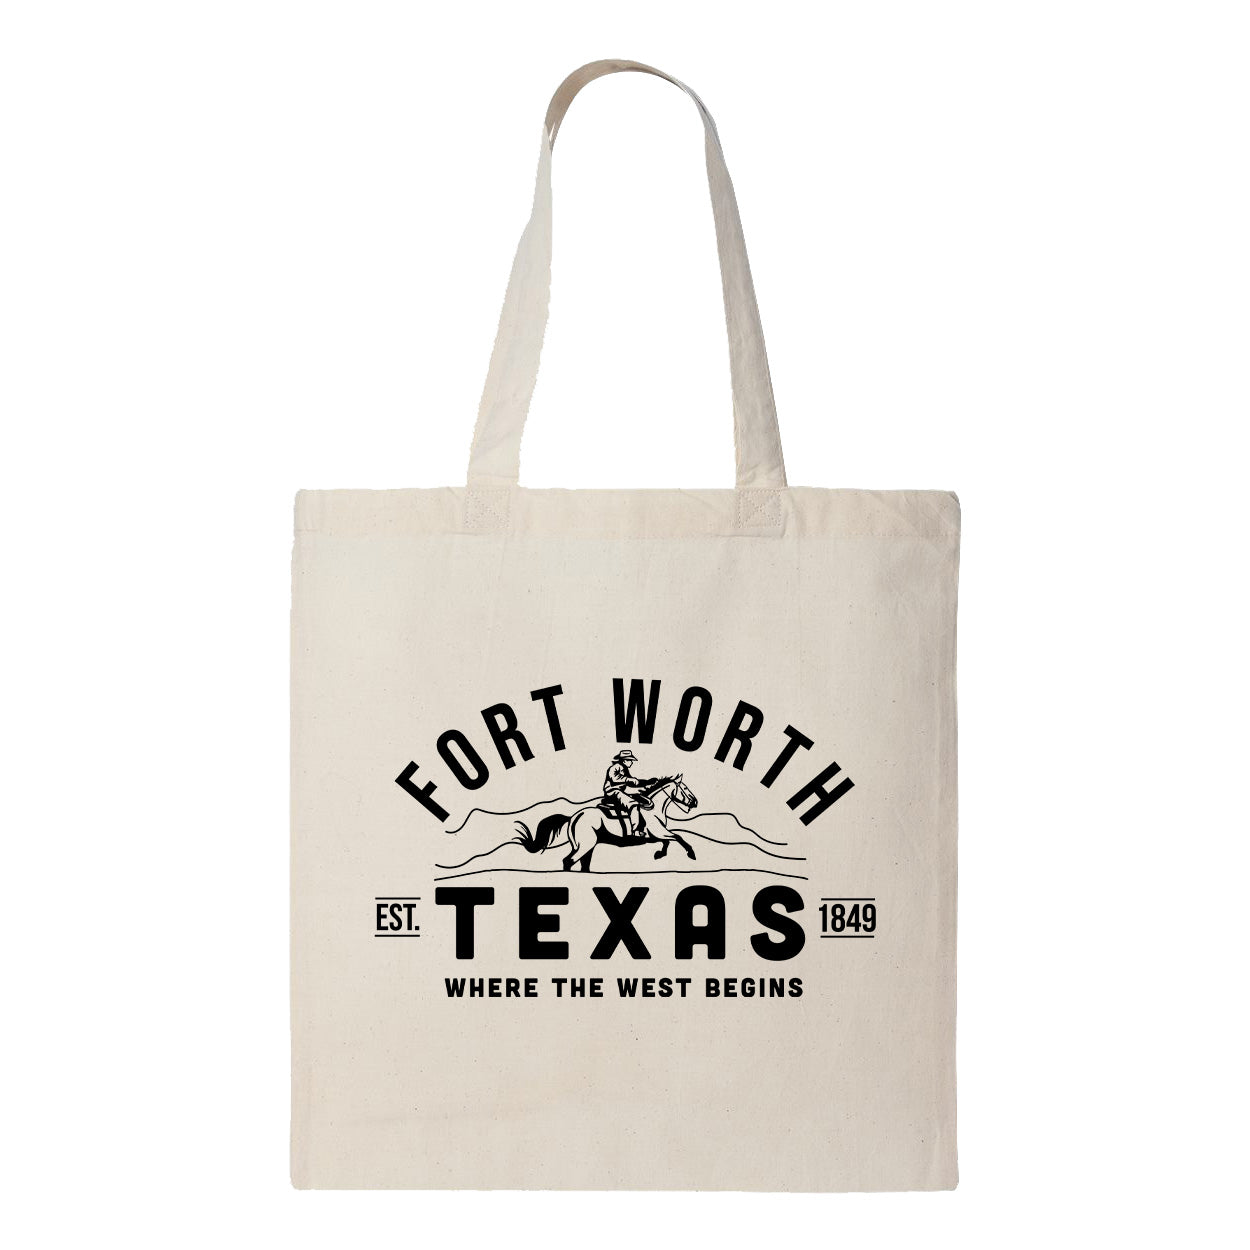 Fort Worth Texas Tote Bag